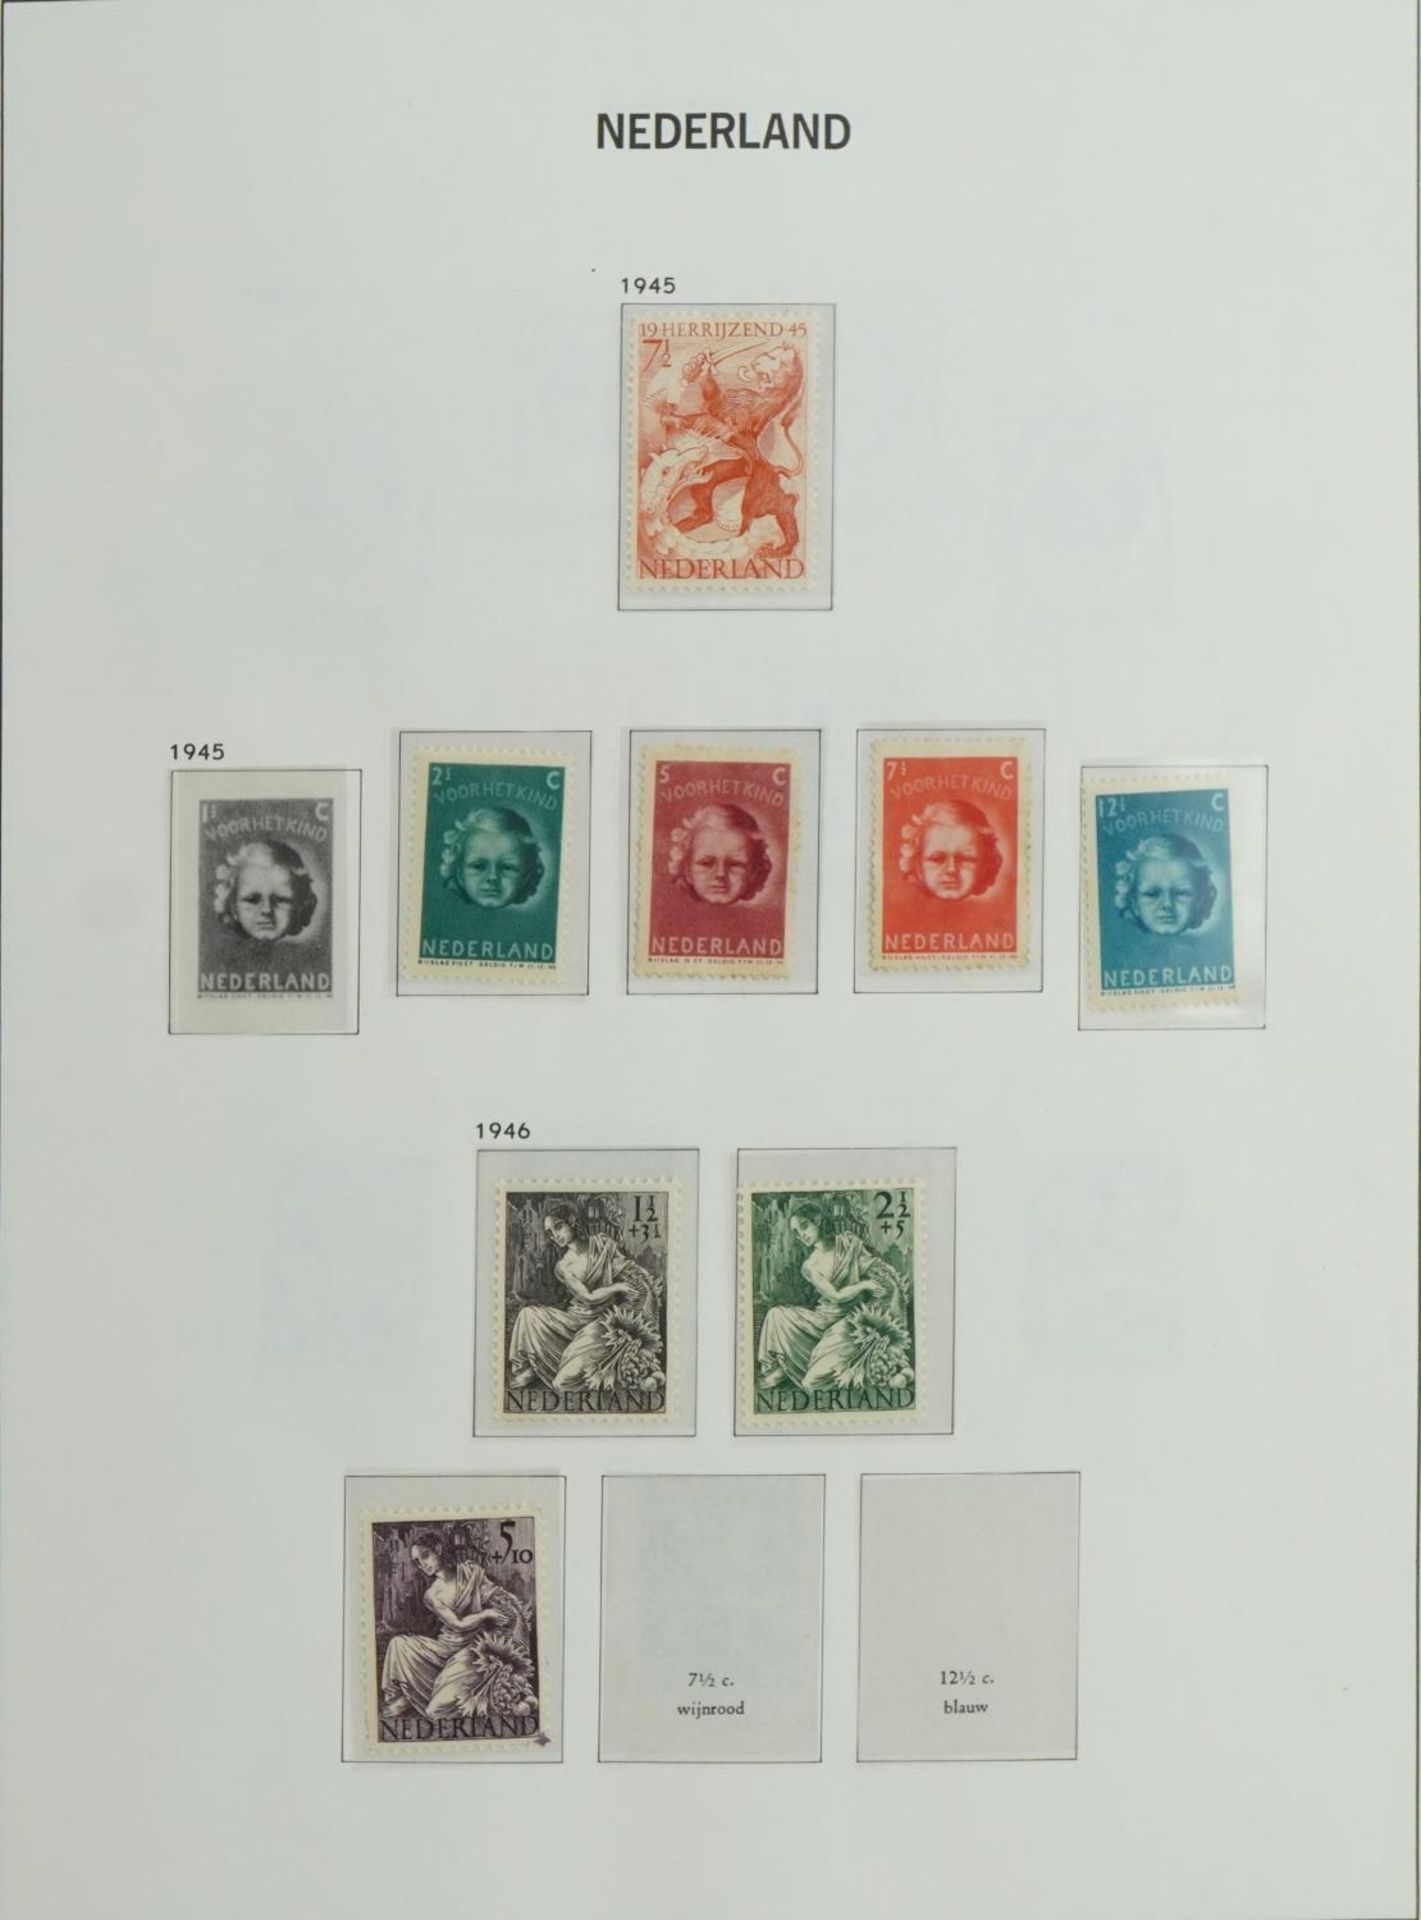 Collection of 20th century Netherlands stamps arranged in an album : For further information on this